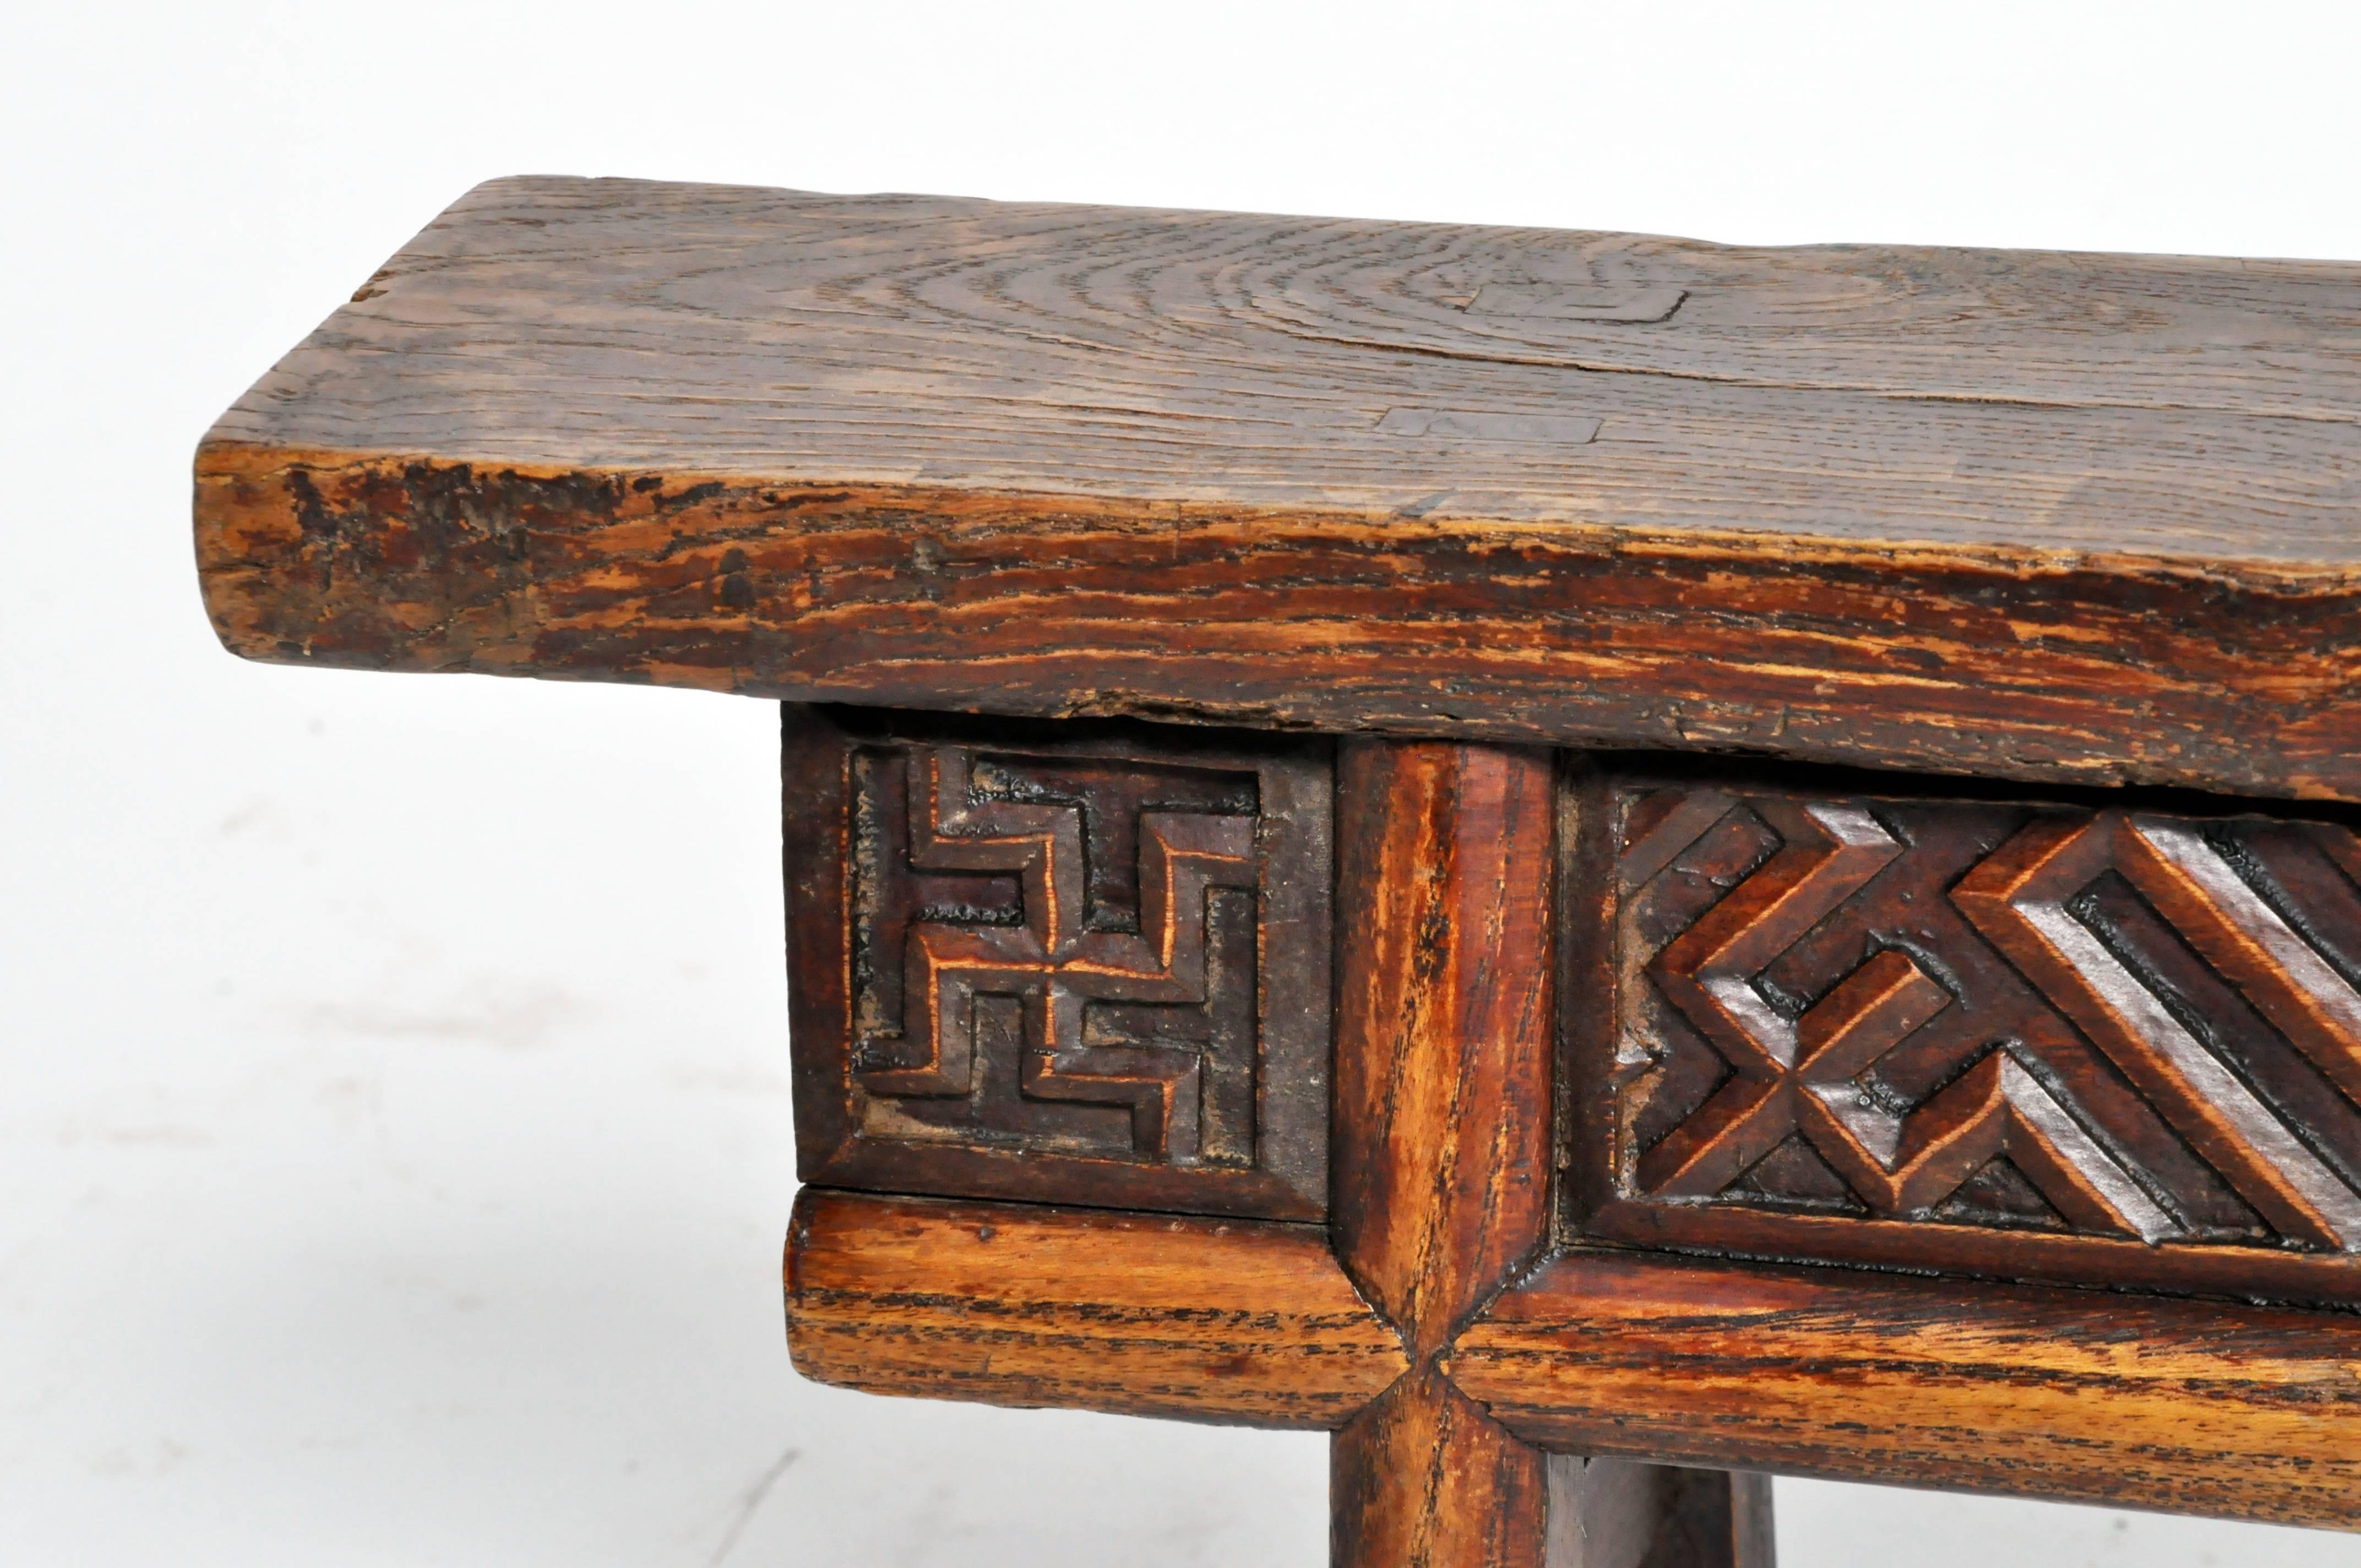 Qing Dynasty Cart Stool with Decorative Carving 1